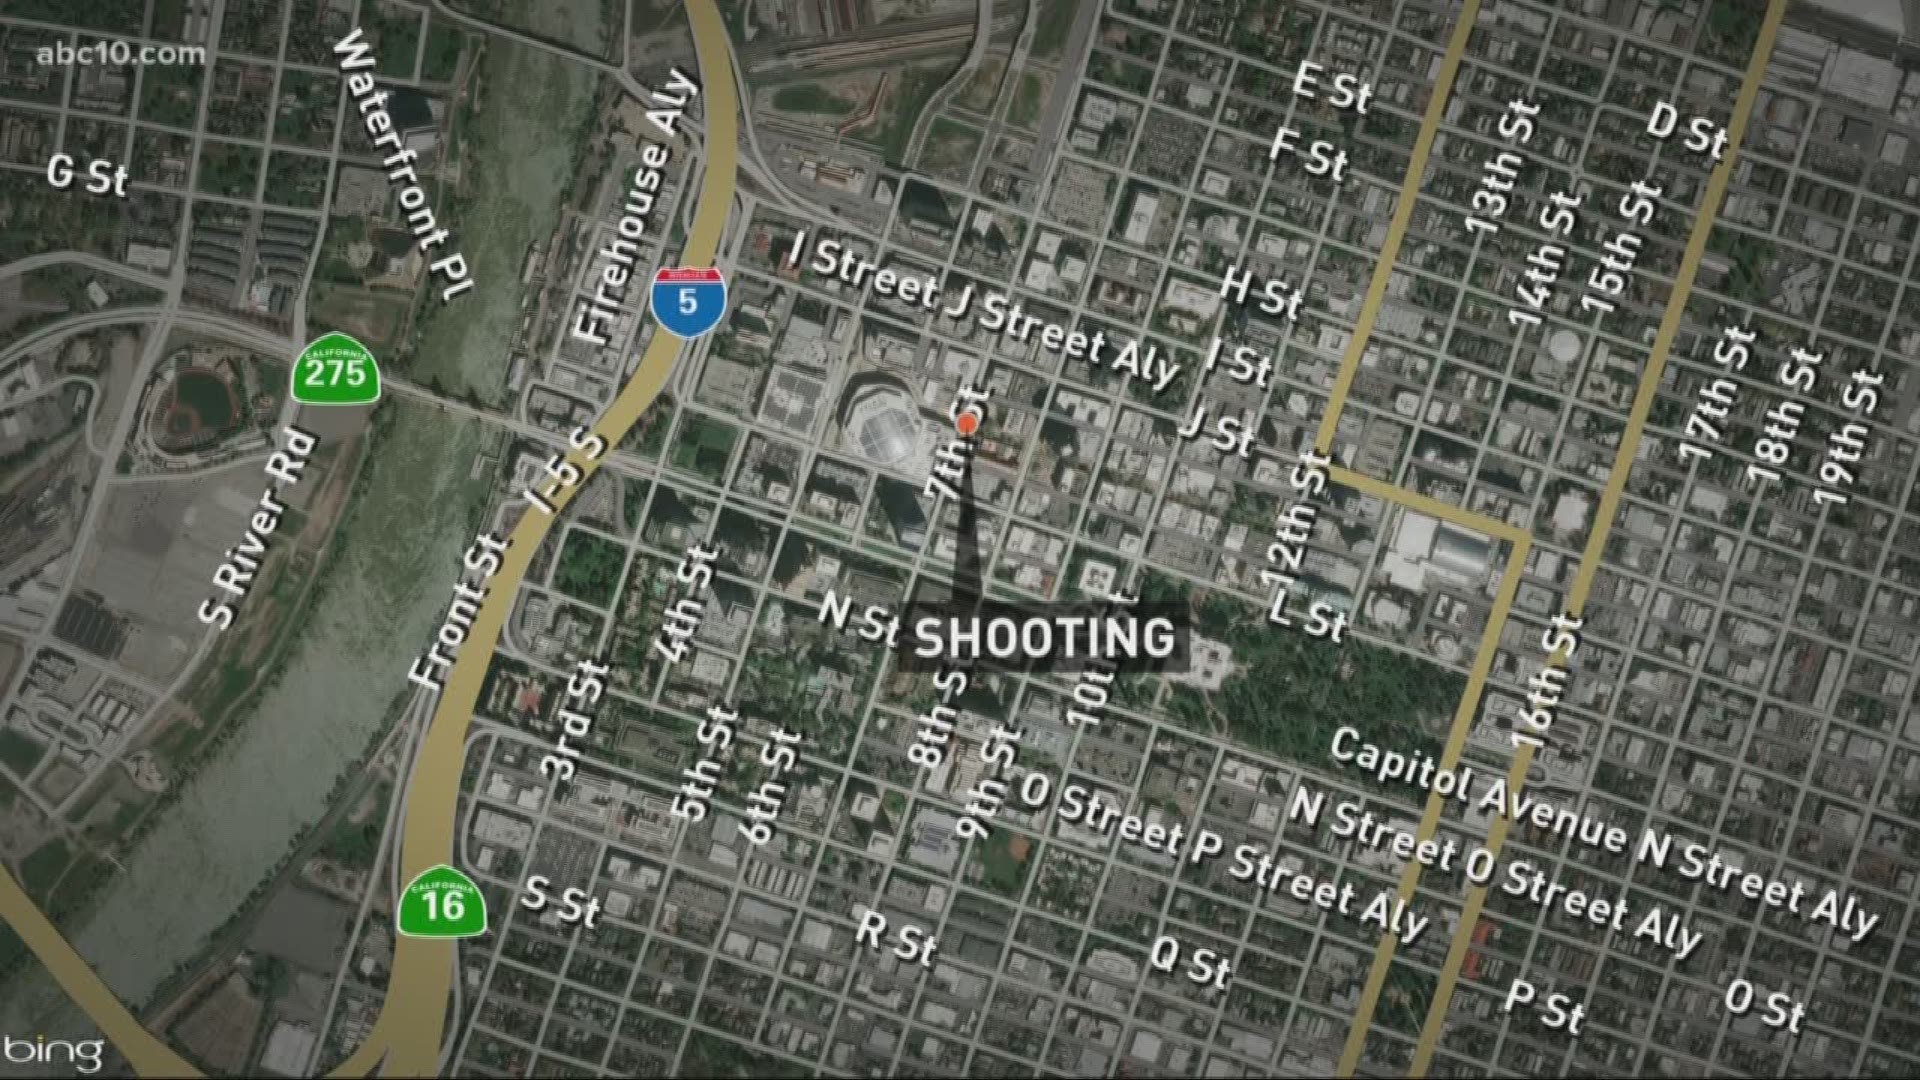 Two men are dead and two others are injured after a shooting near Golden 1 Center early Sunday morning, according to to the Sacramento Police Department. Police said the shooting happened around 1:47 a.m. near 7th and K Streets.